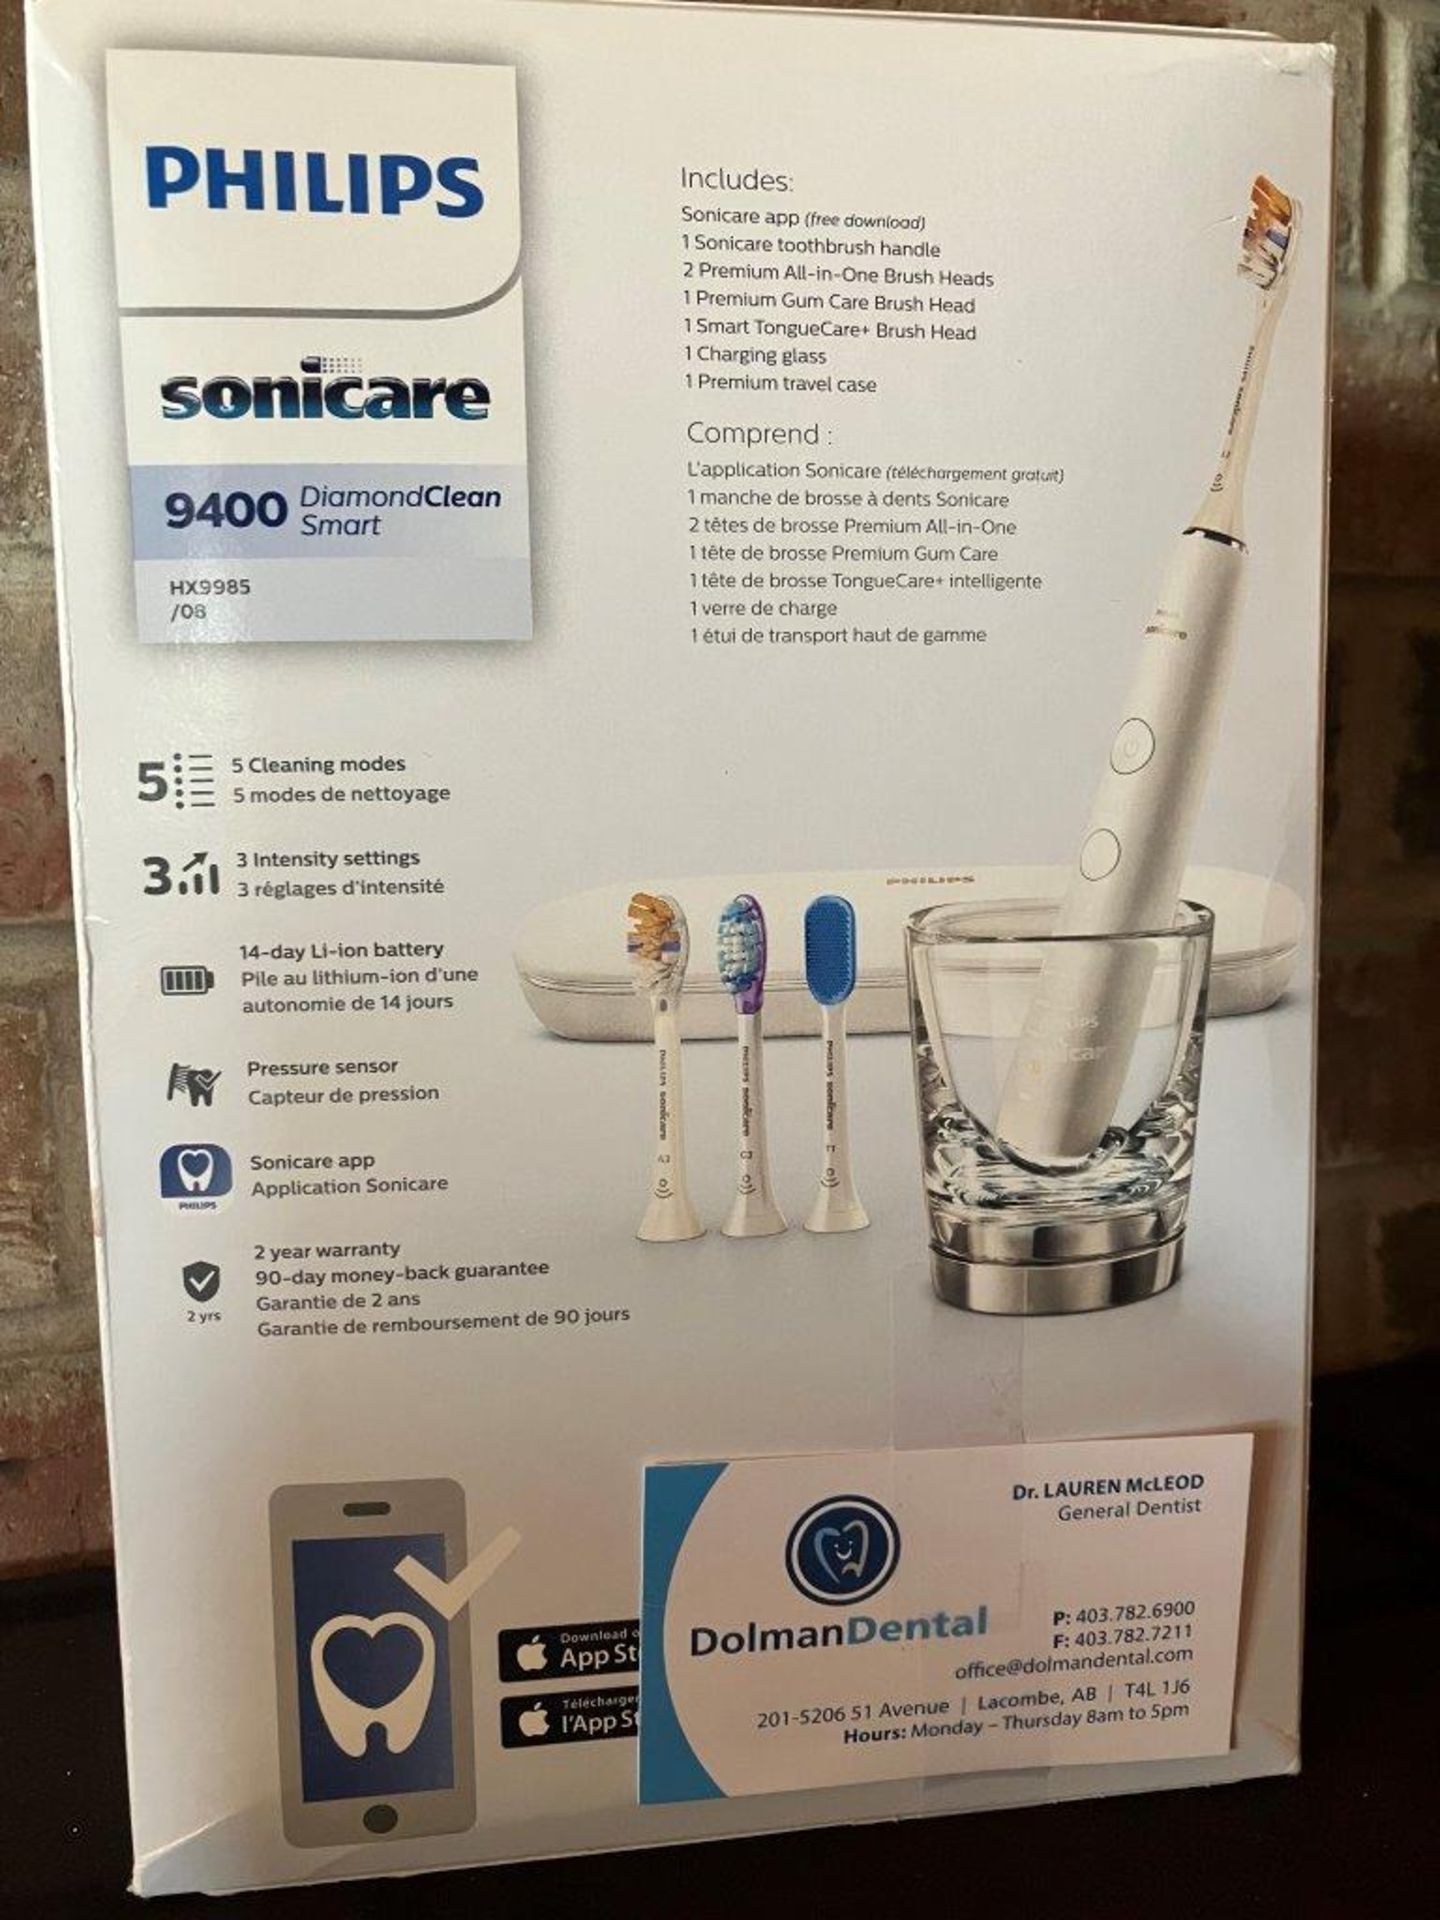 SONICARE 9400 DIAMOND CLEAN SMART POWER TOOTHBRUSH - Image 2 of 4